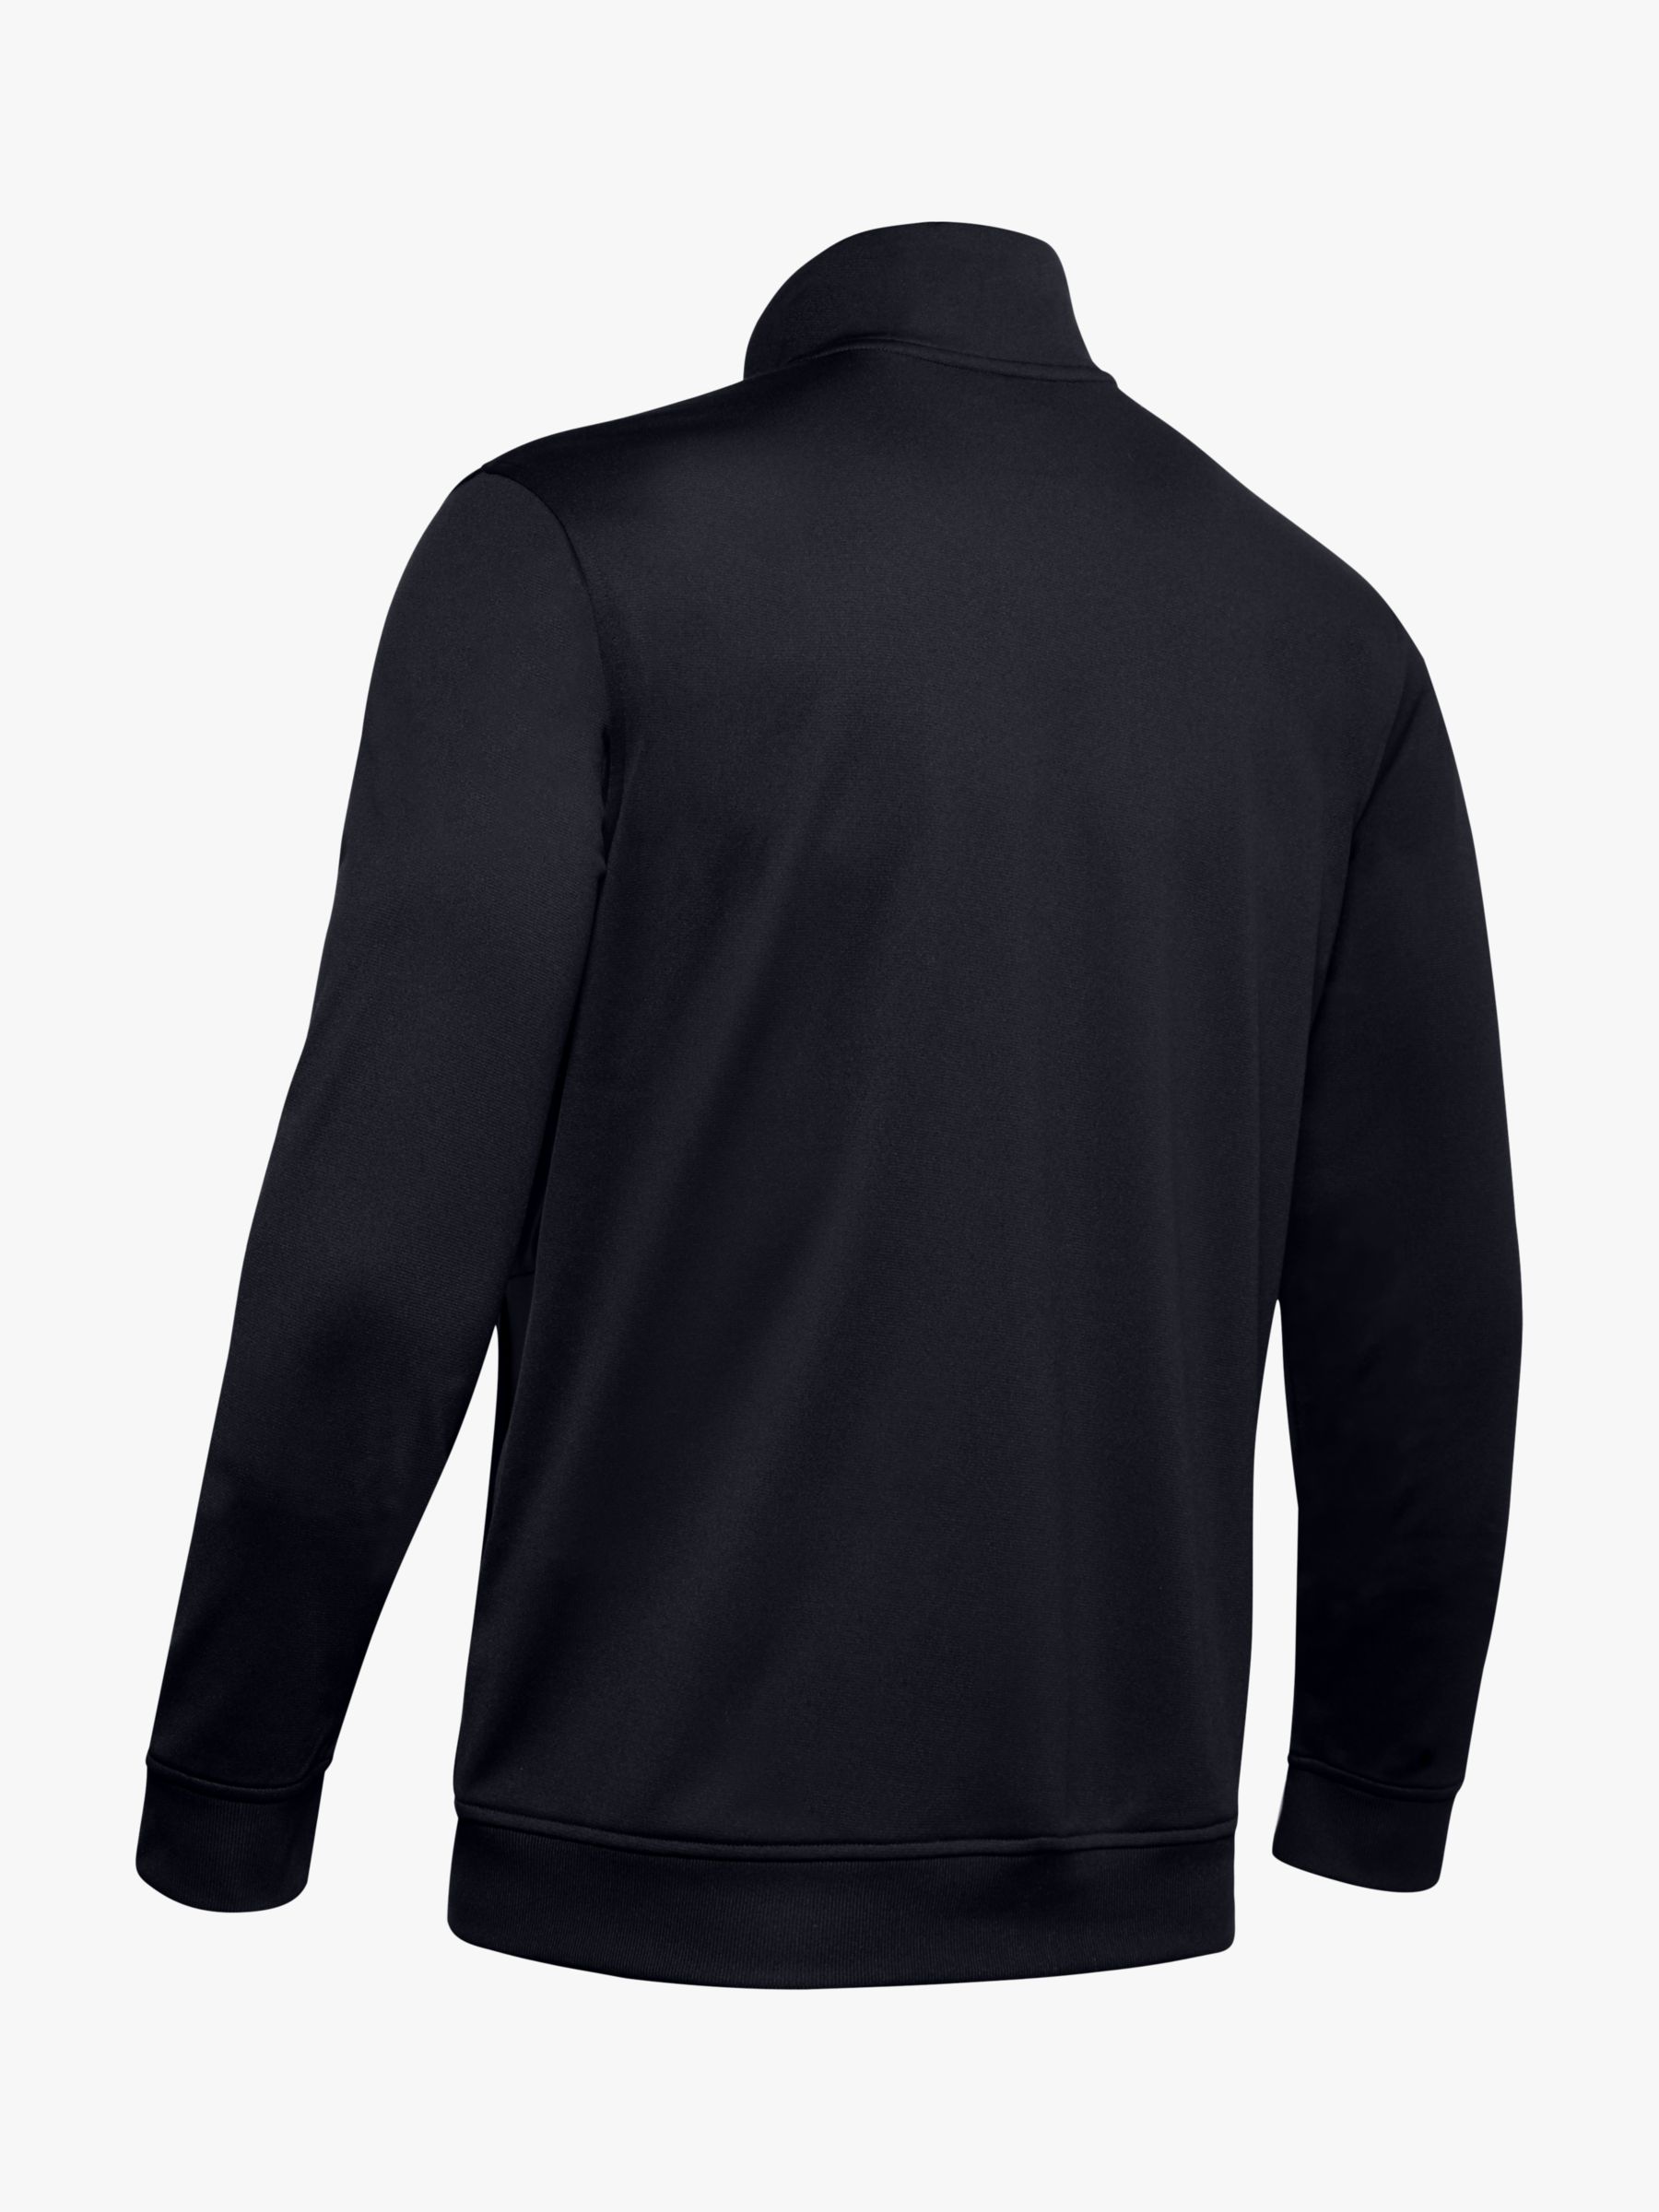 Under Armour Sportstyle Tricot Men's Gym Jacket at John Lewis & Partners